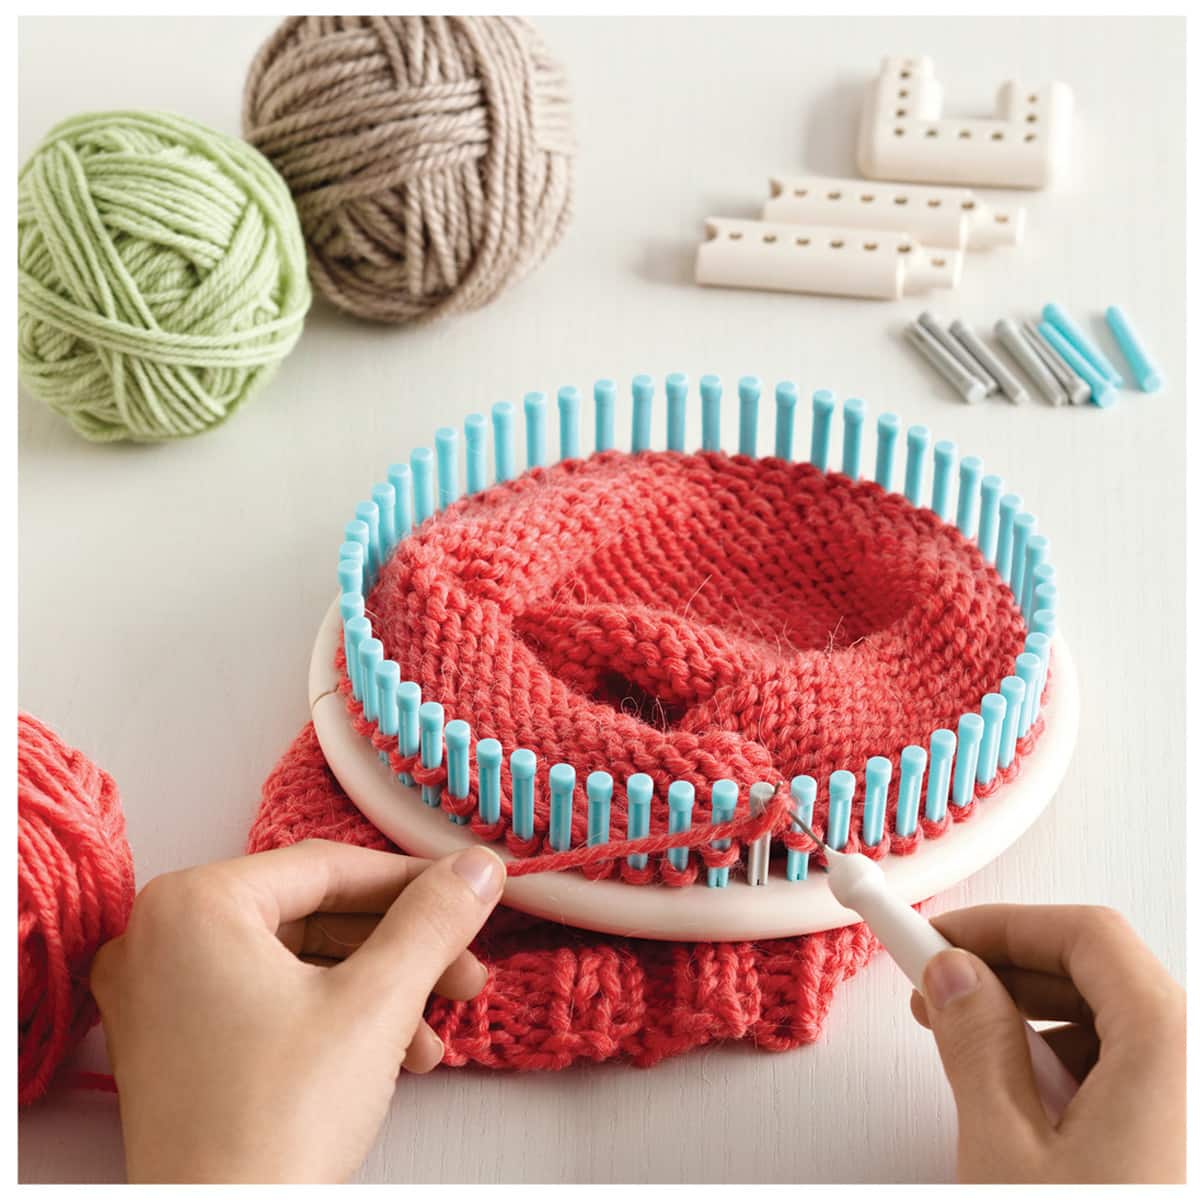 What can i knit on a loom